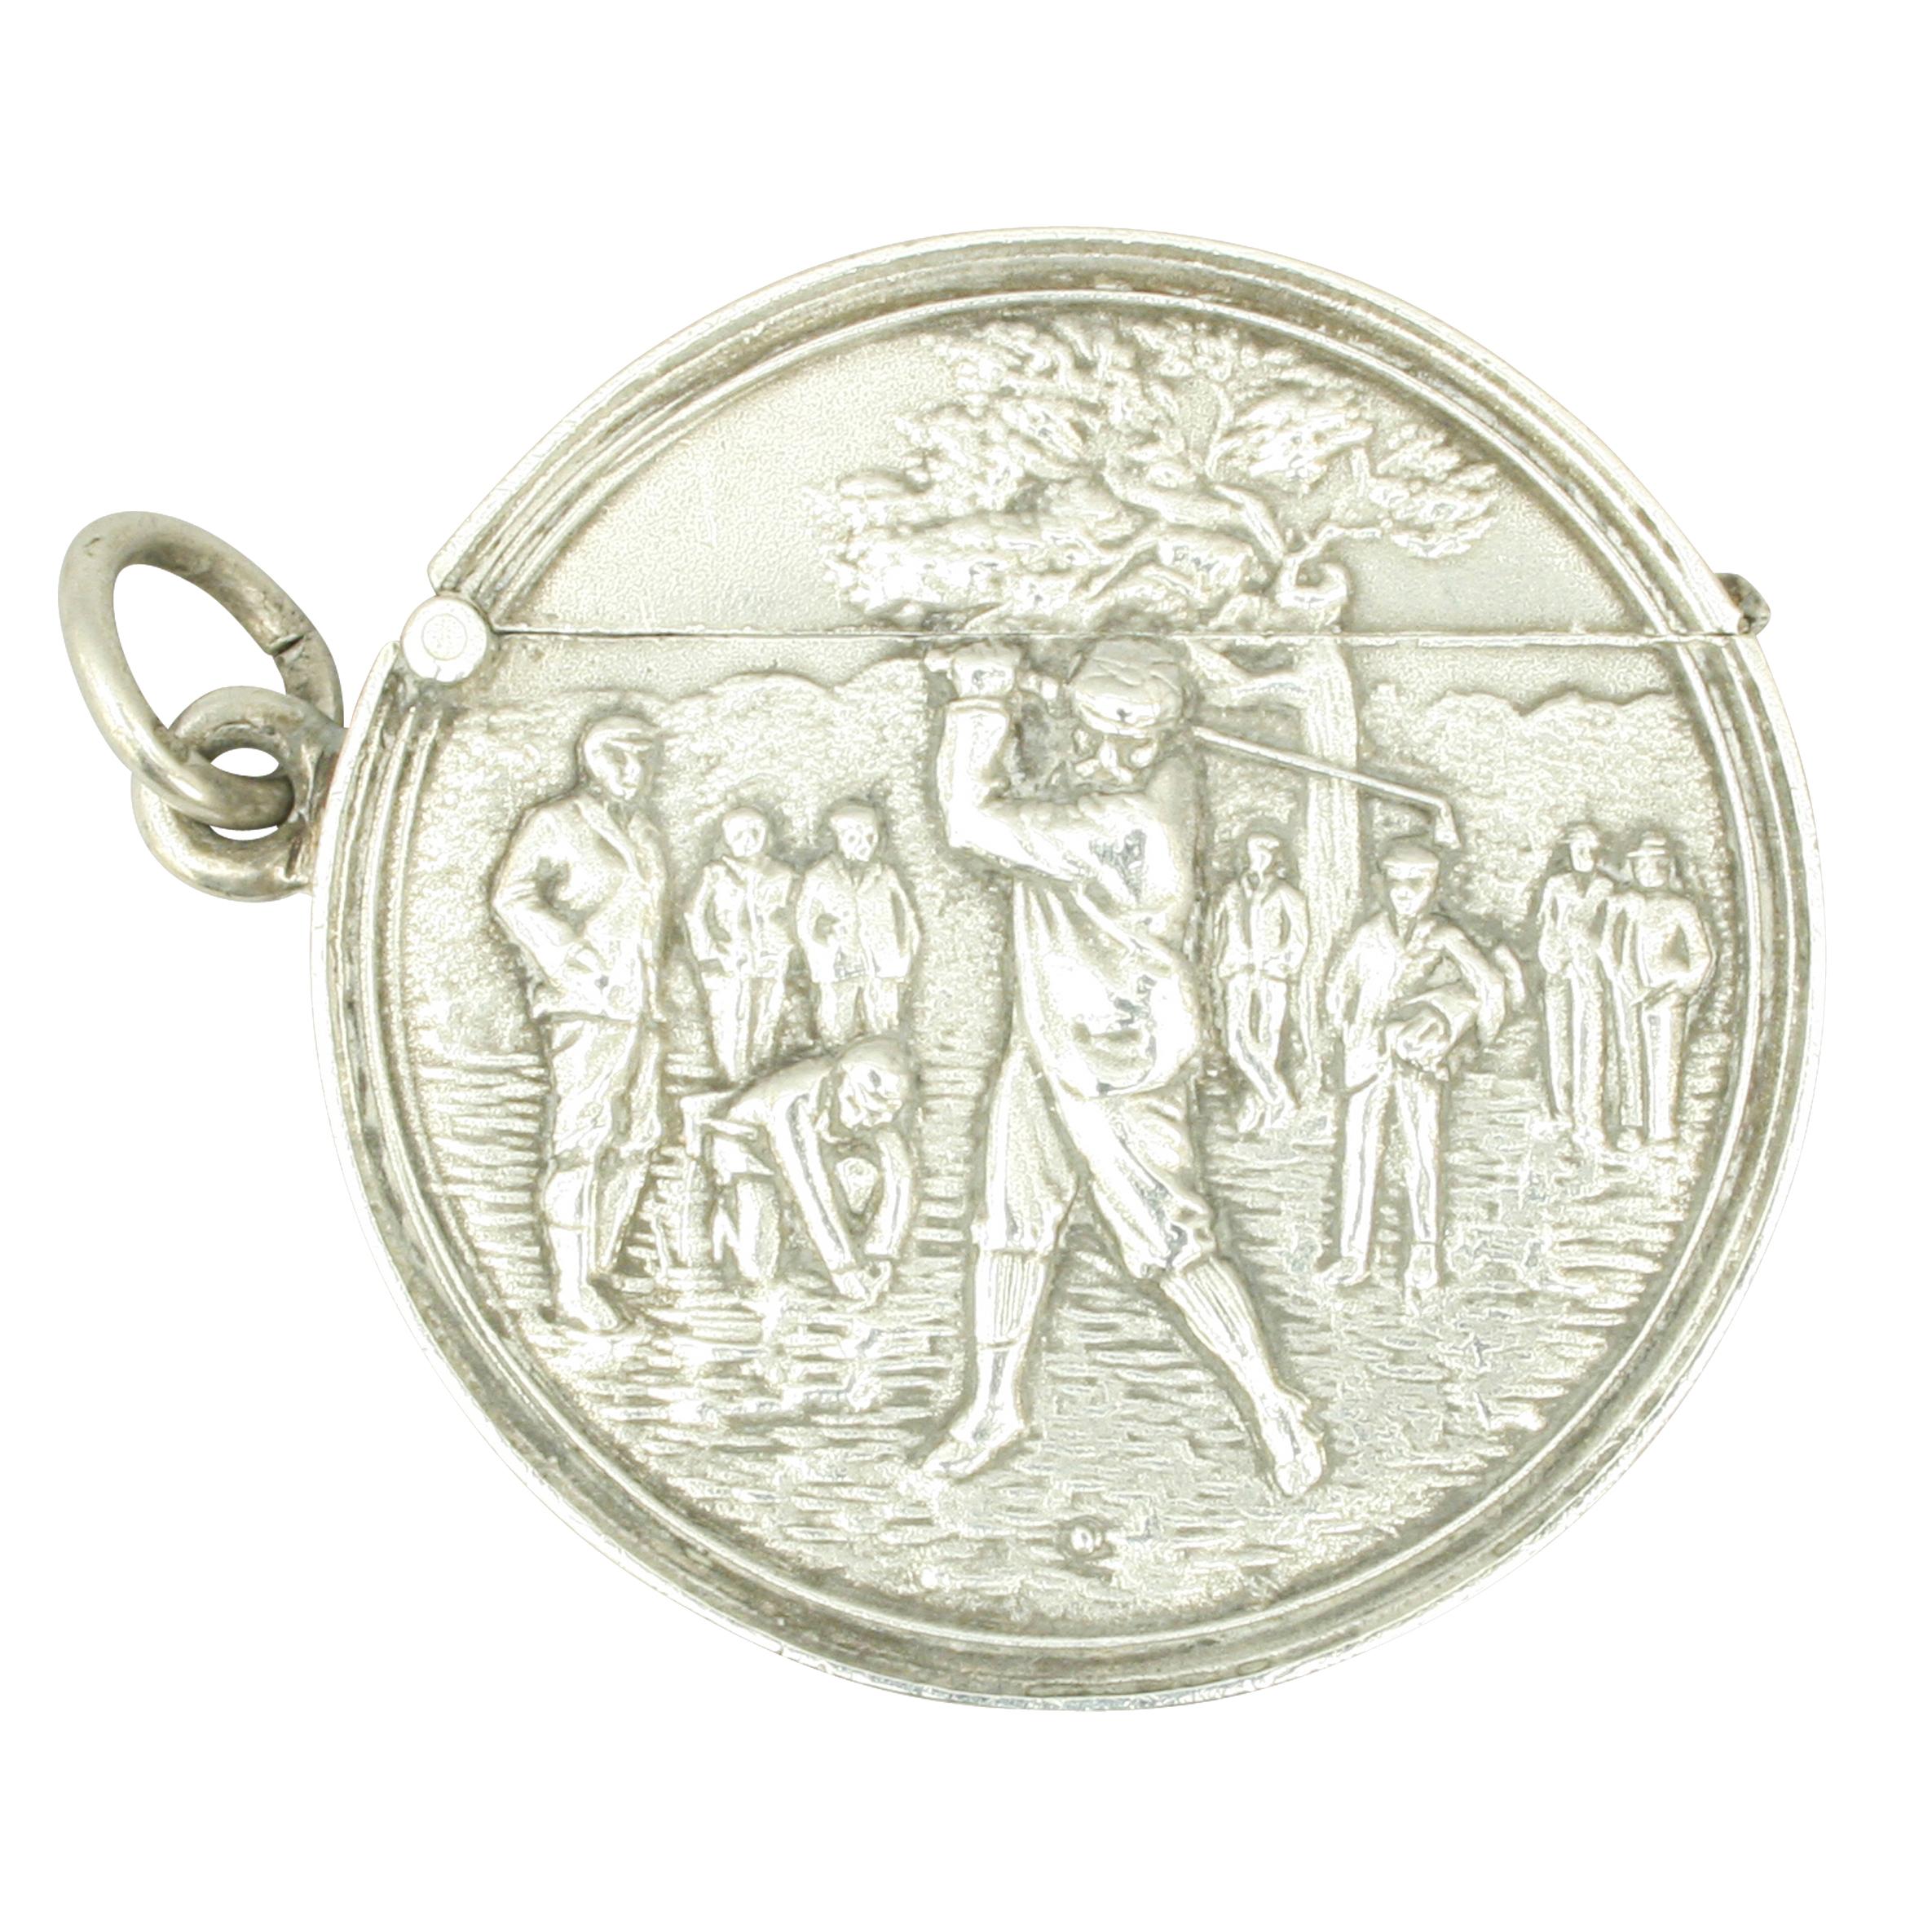 Golf Vesta case
A round antique silver golfing match safe with striker on the bottom. The match holder is embossed with a golfing scene of a male golfer in his back swing watched by eight other golfers to the front, engraved on the rear 'Won by